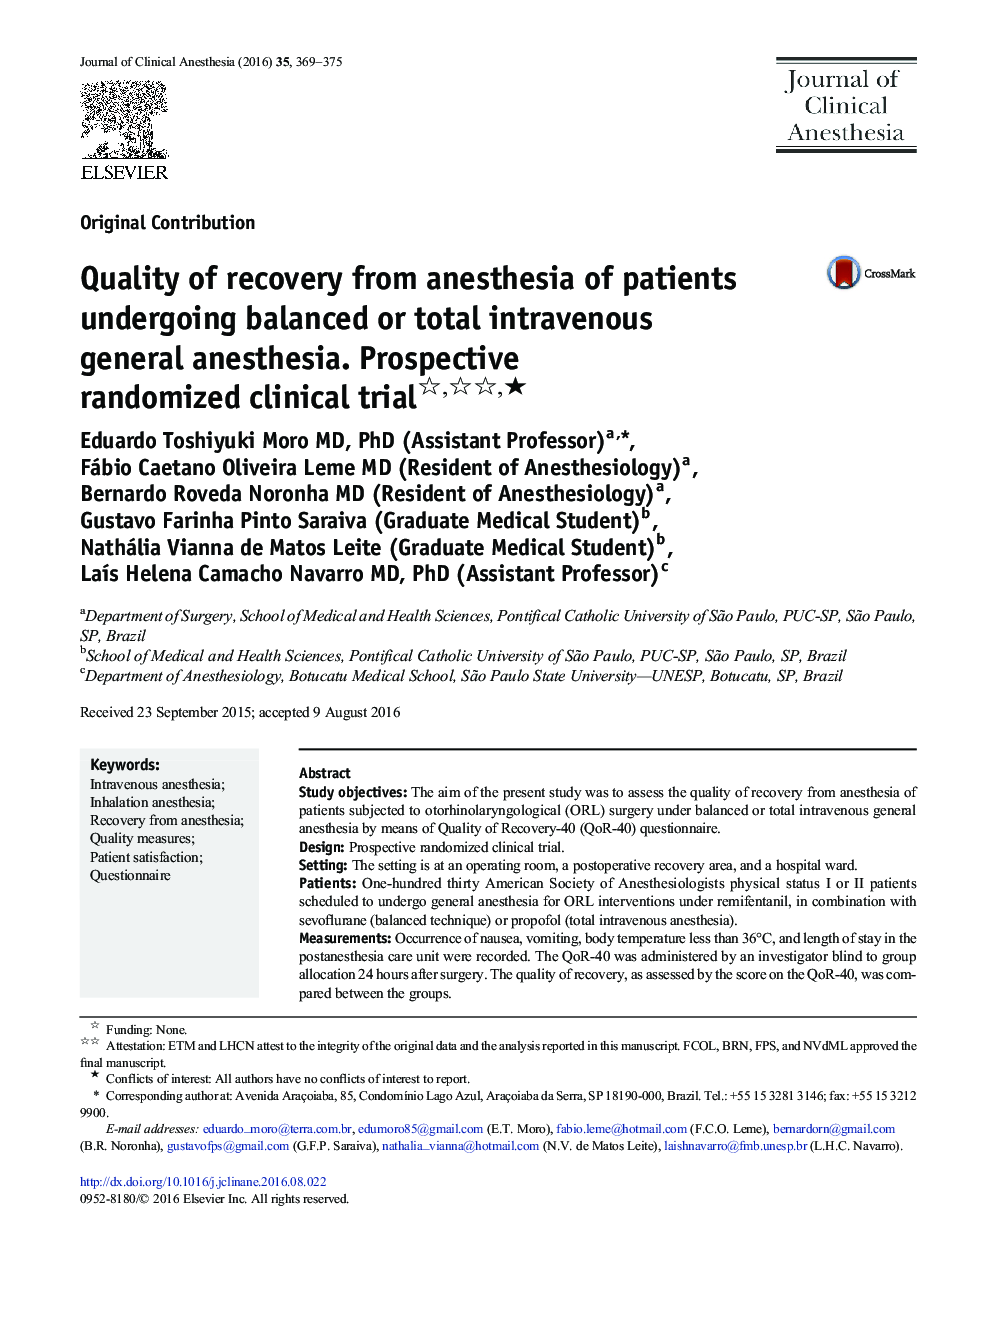 Quality of recovery from anesthesia of patients undergoing balanced or total intravenous general anesthesia. Prospective randomized clinical trialâ